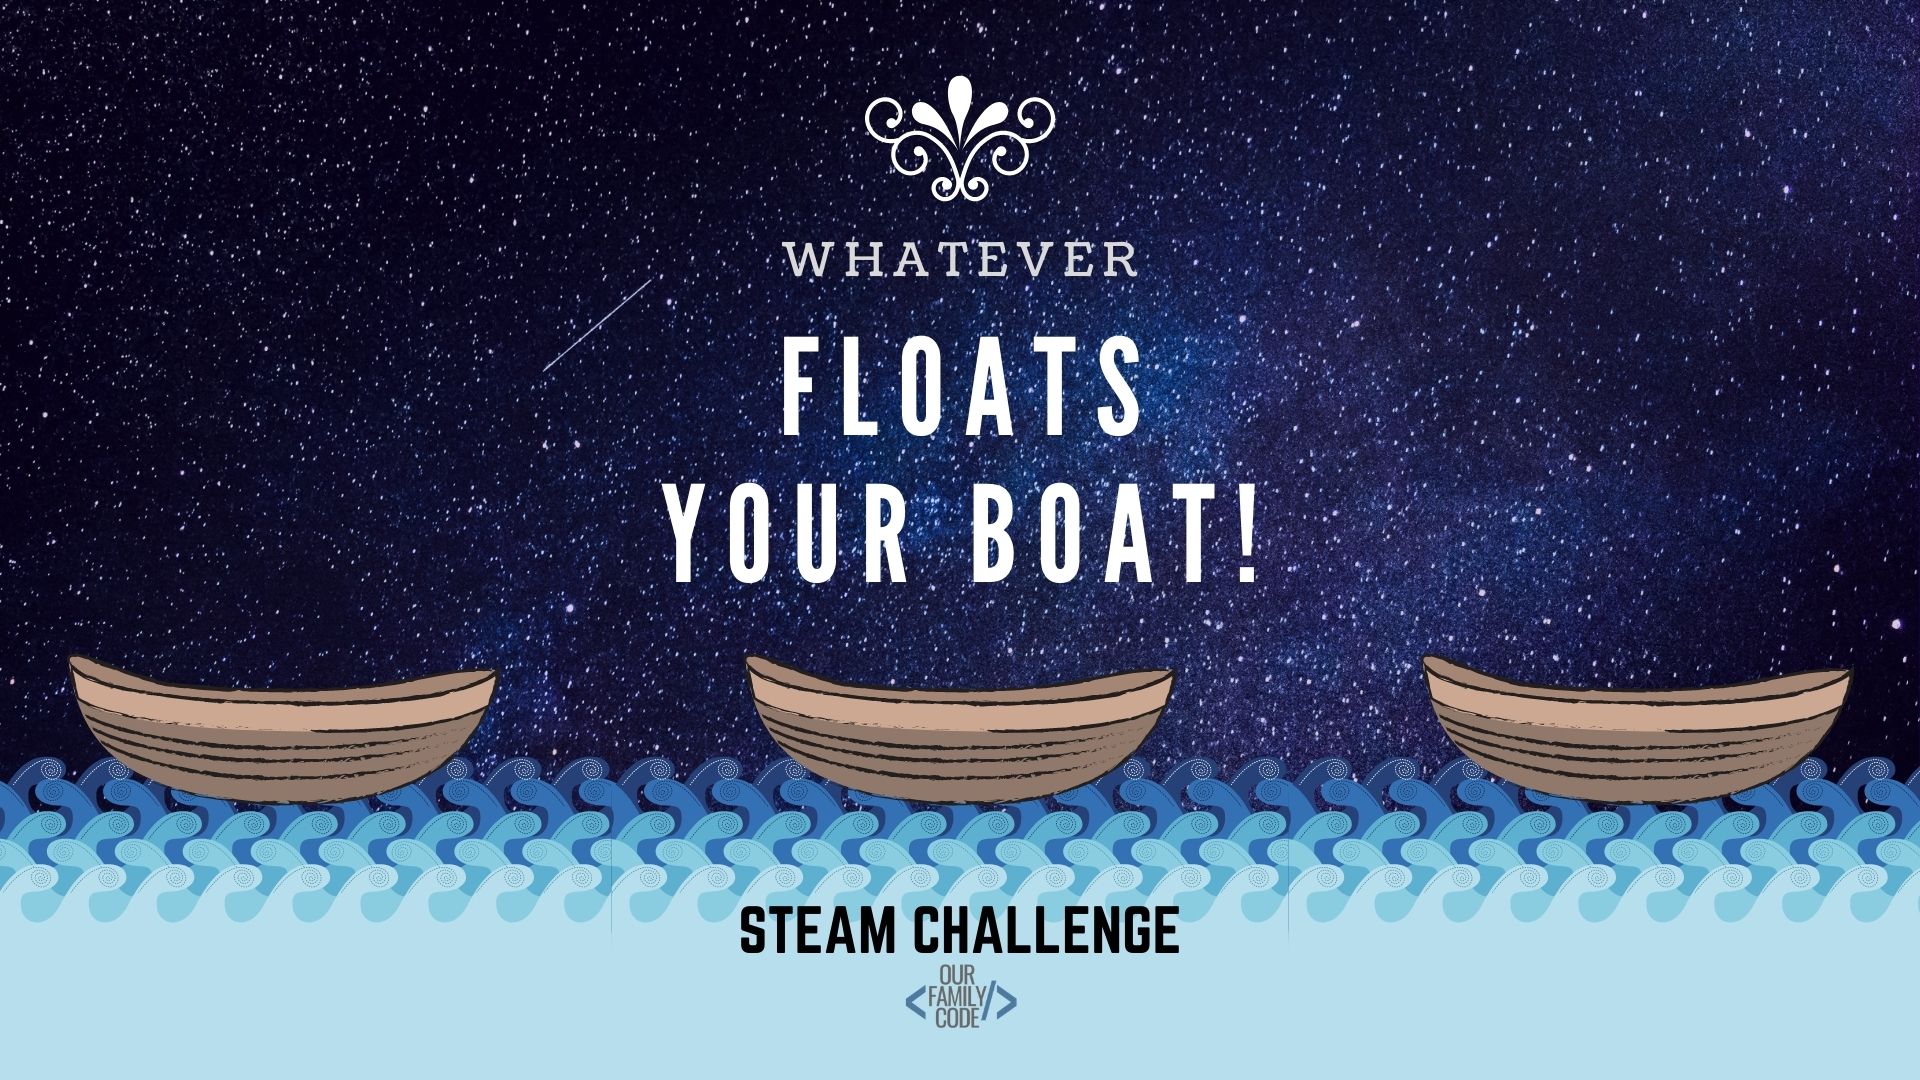 Learn about gravity and buoyancy with this 'build a boat that floats' STEAM challenge with free challenge worksheets for kids ages 5-12! #STEAM #STEM #engineeringforkids #STEAMactivities